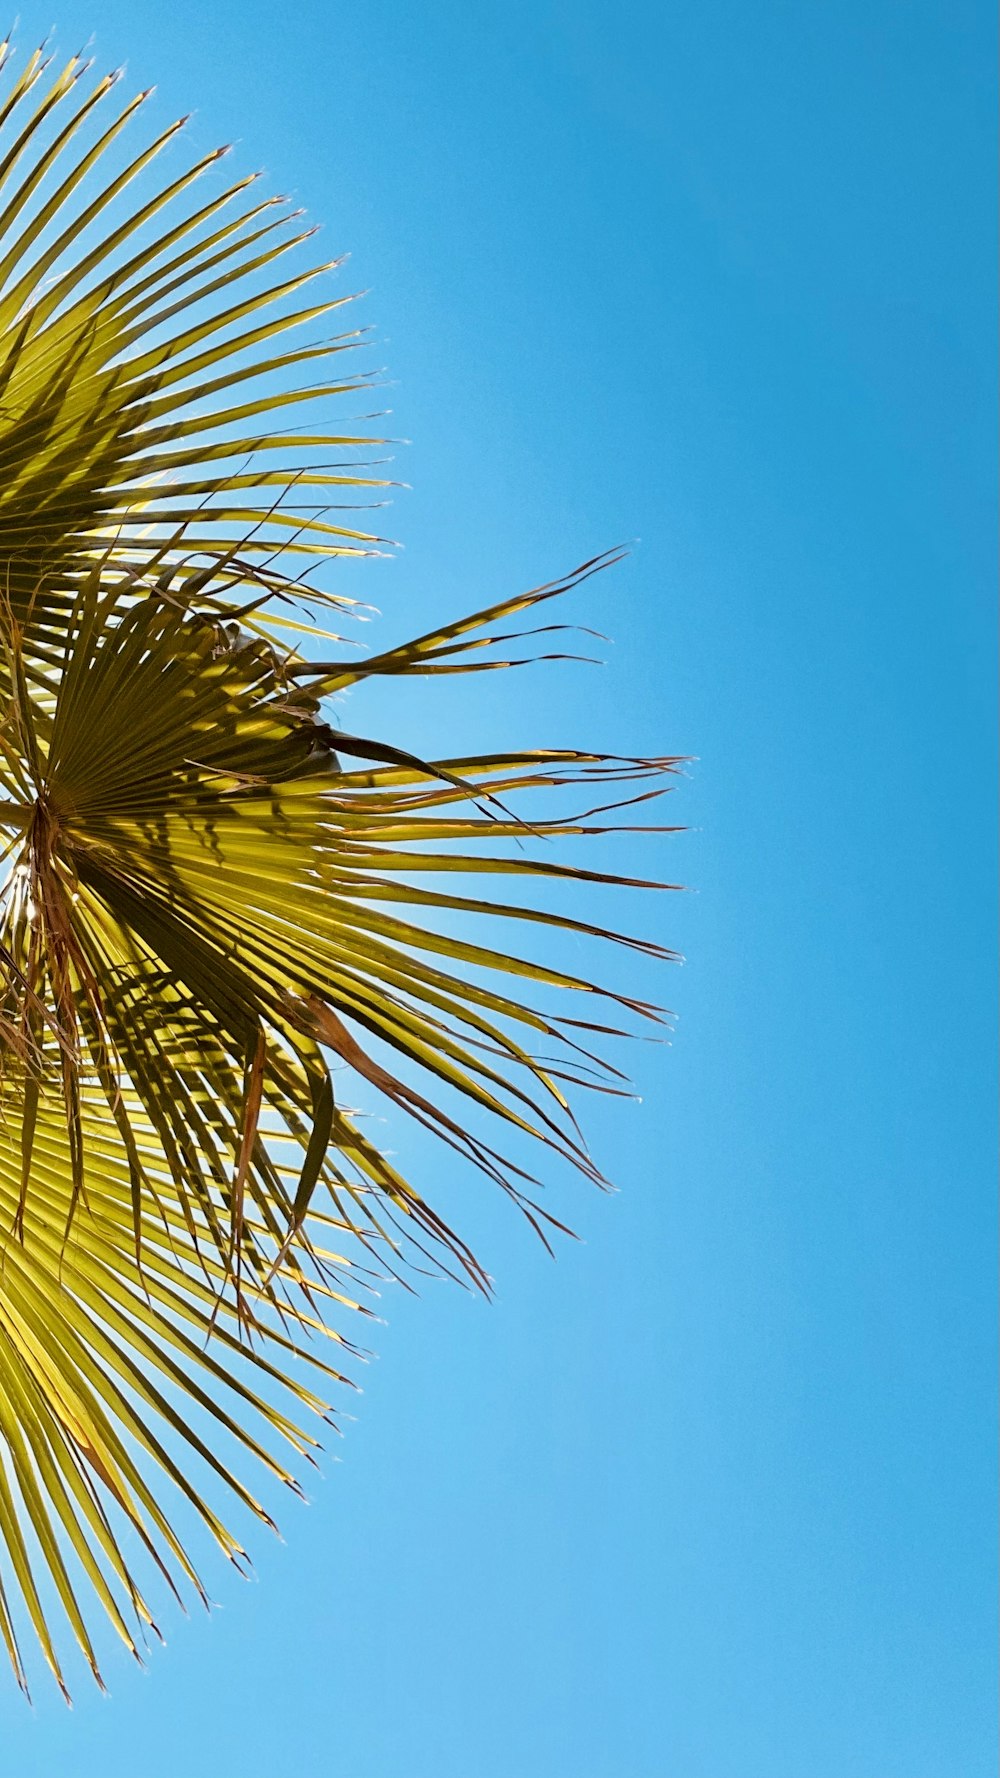 a close up of a palm tree with a blue sky in the background